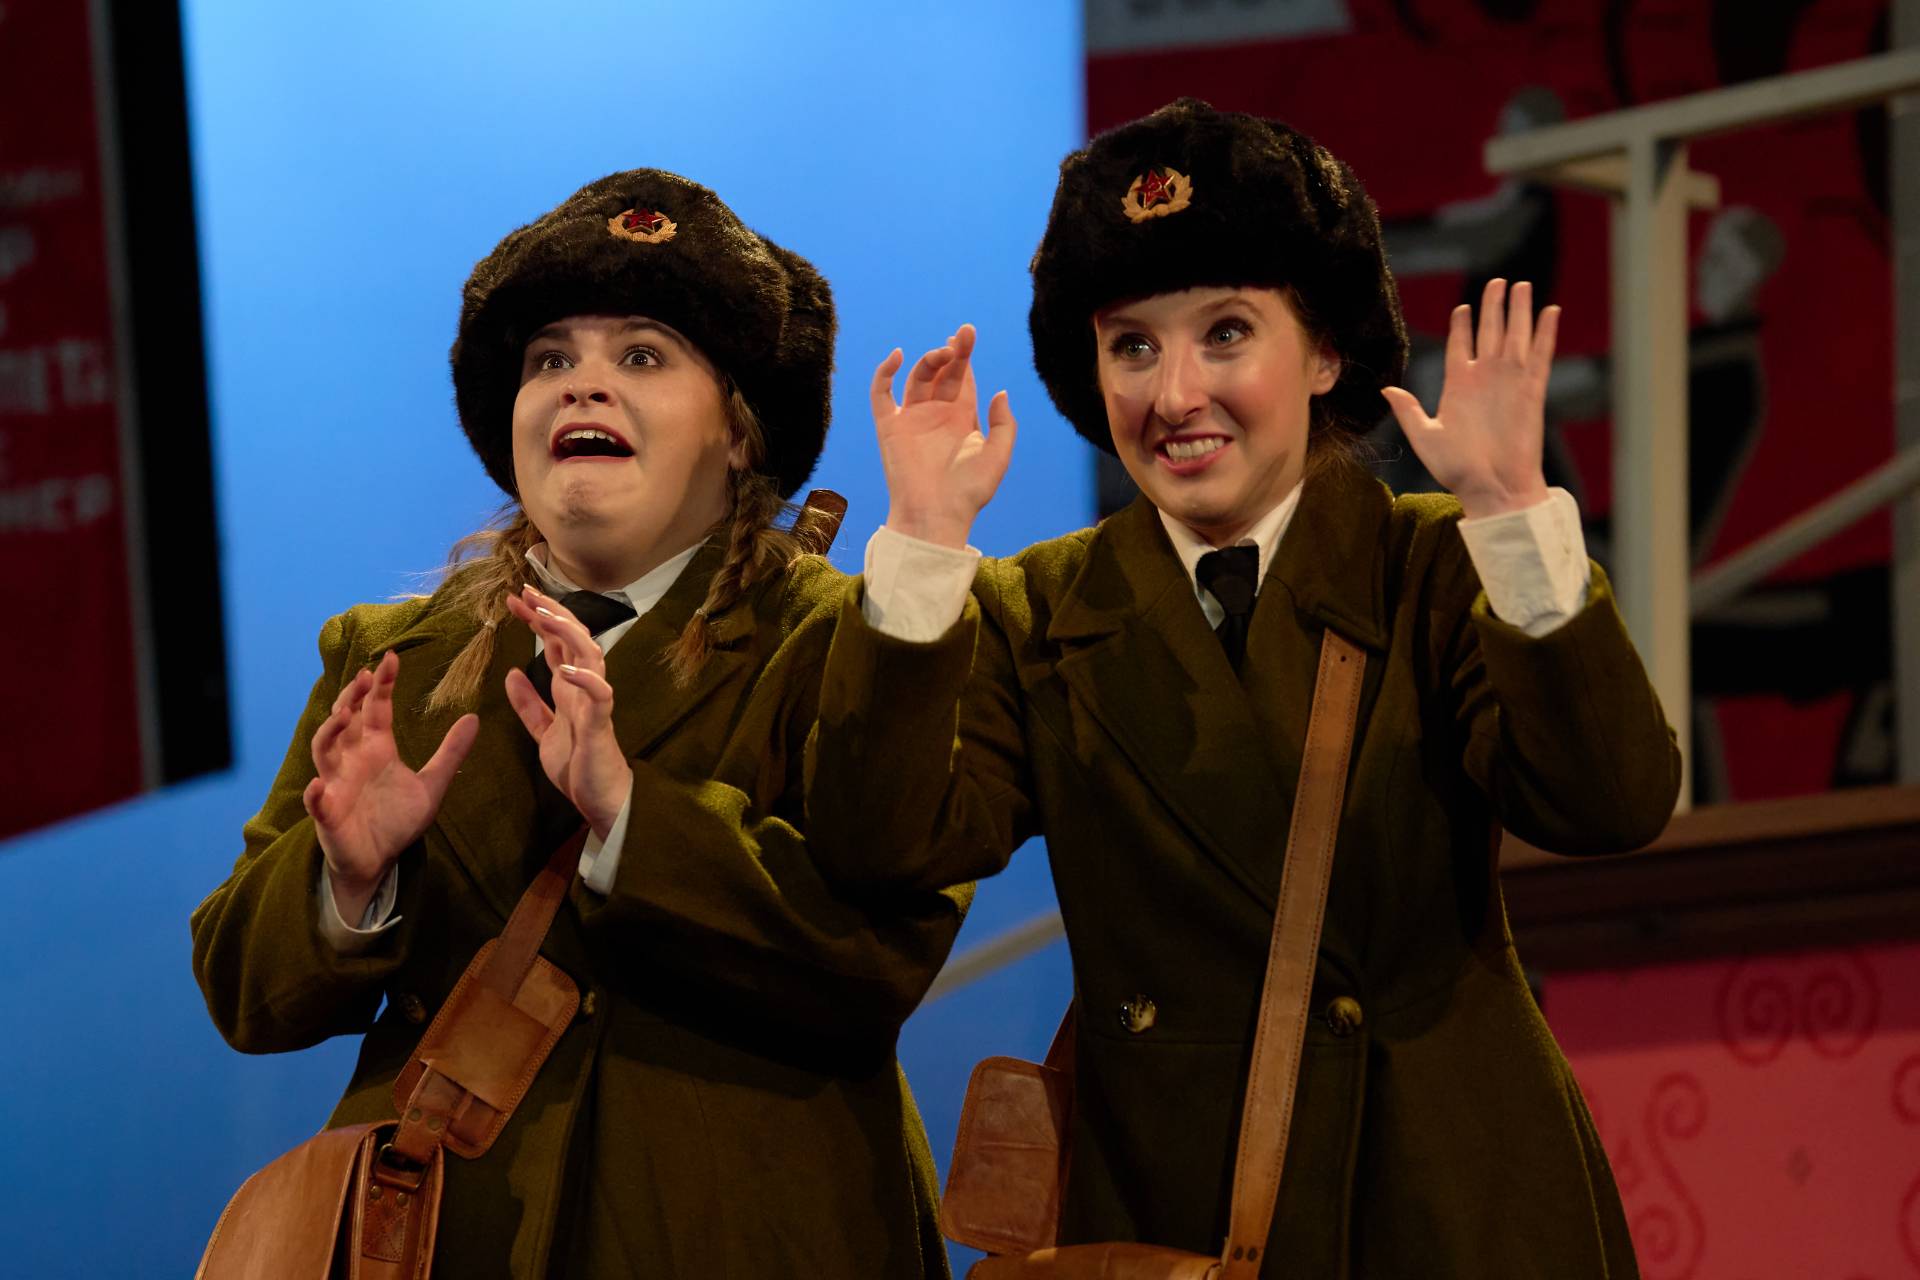 Two women in Russian uniforms look excited.